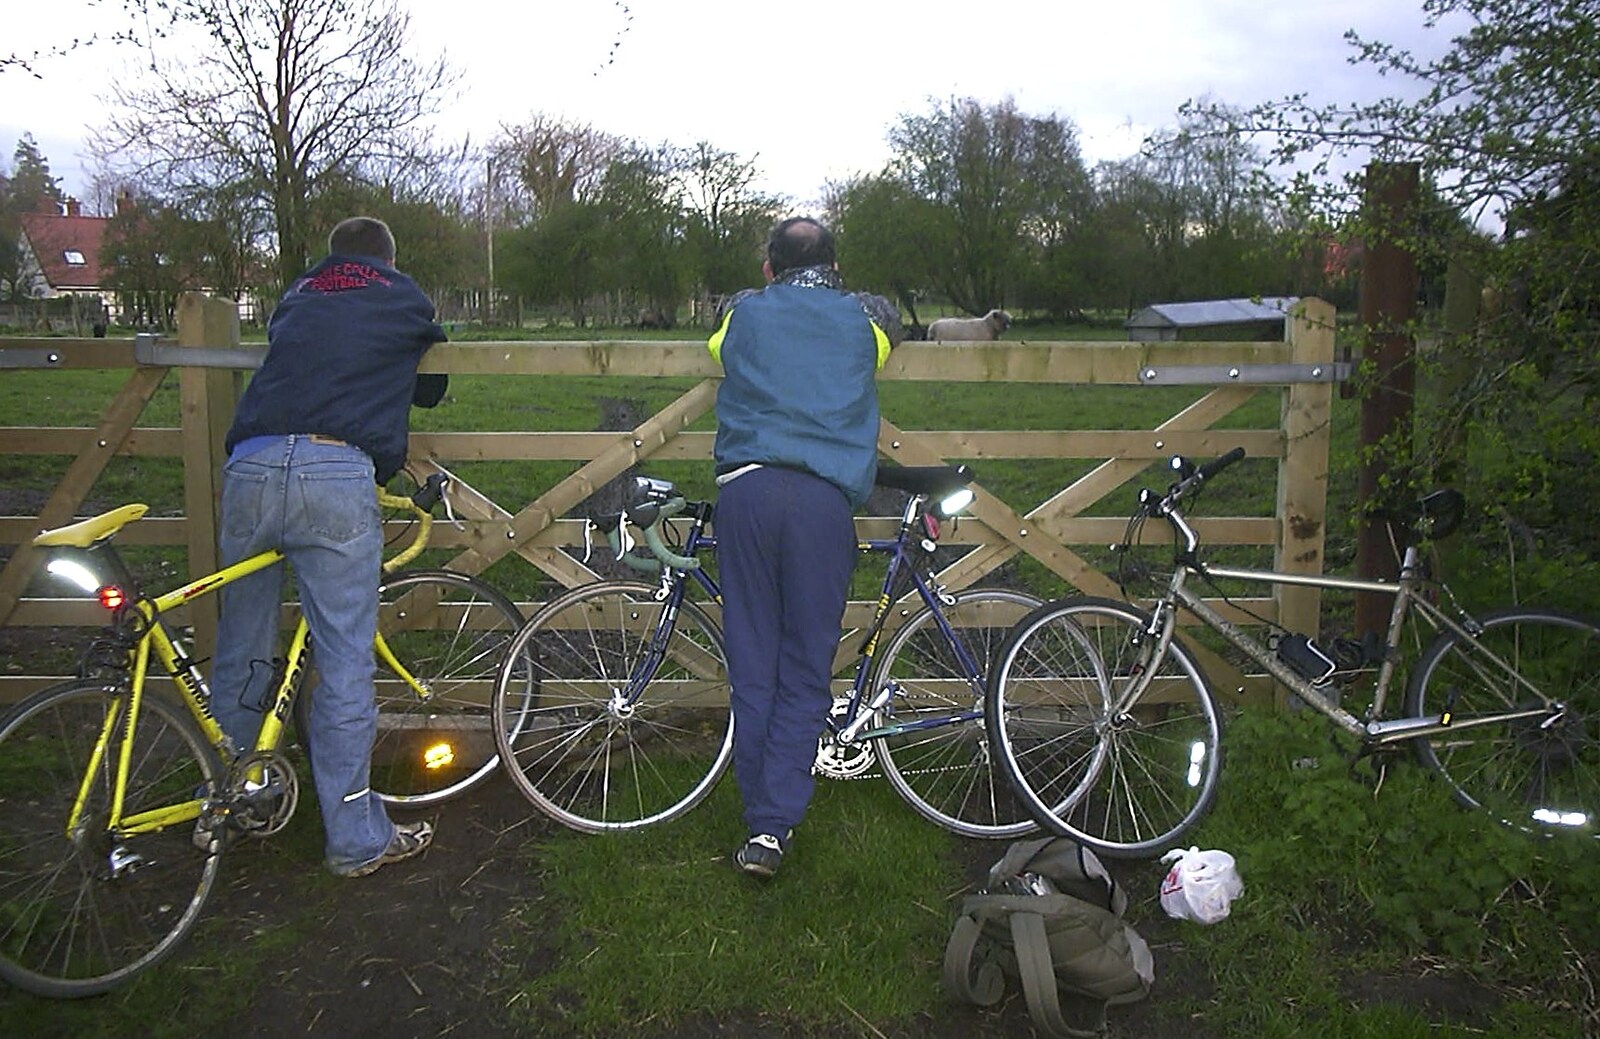 The BSCC Easter Bike Ride, Thelnetham and Redgrave, Suffolk - 10th April 2004: We look at sheep for an hour